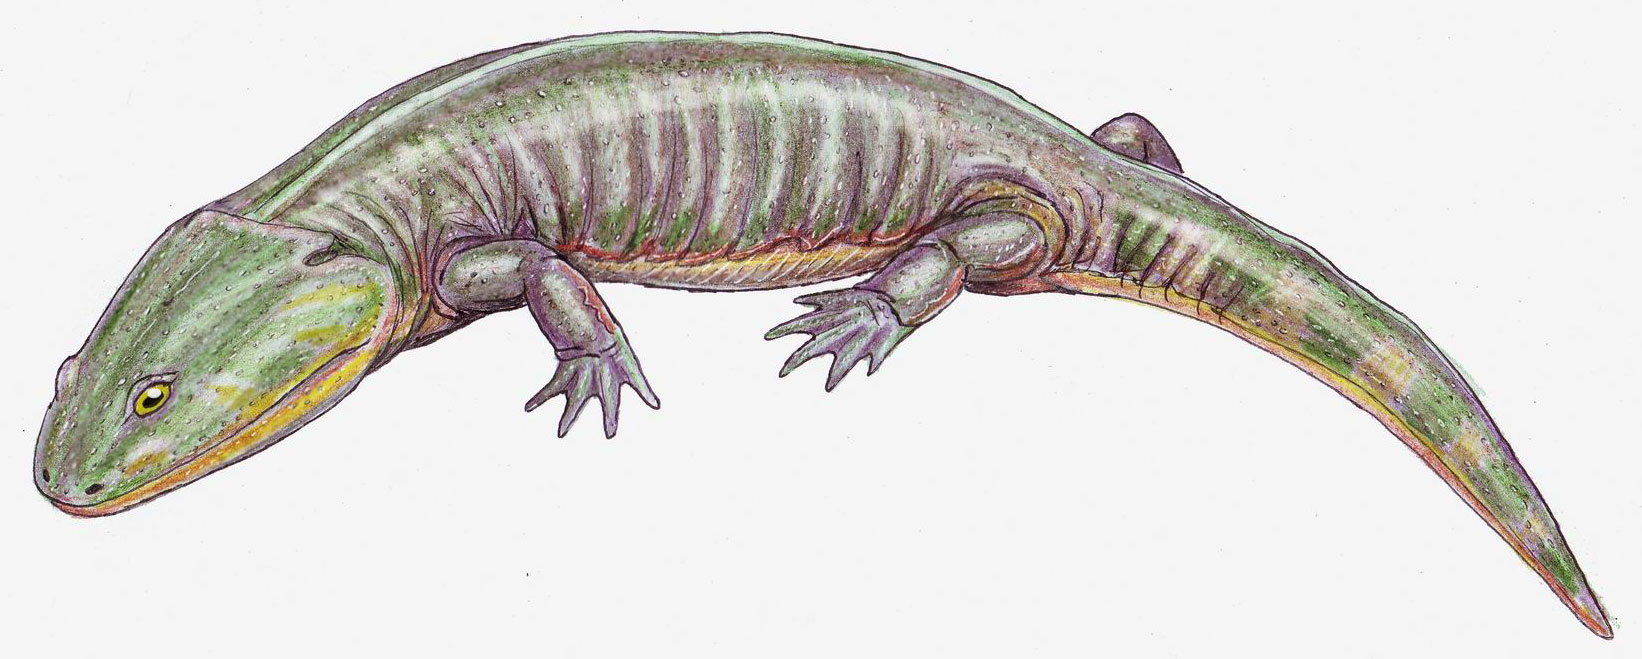 Illustration (drawing) reconstructing how Apachesaurus may have looked in life. The drawing shows a salamander-like animal.